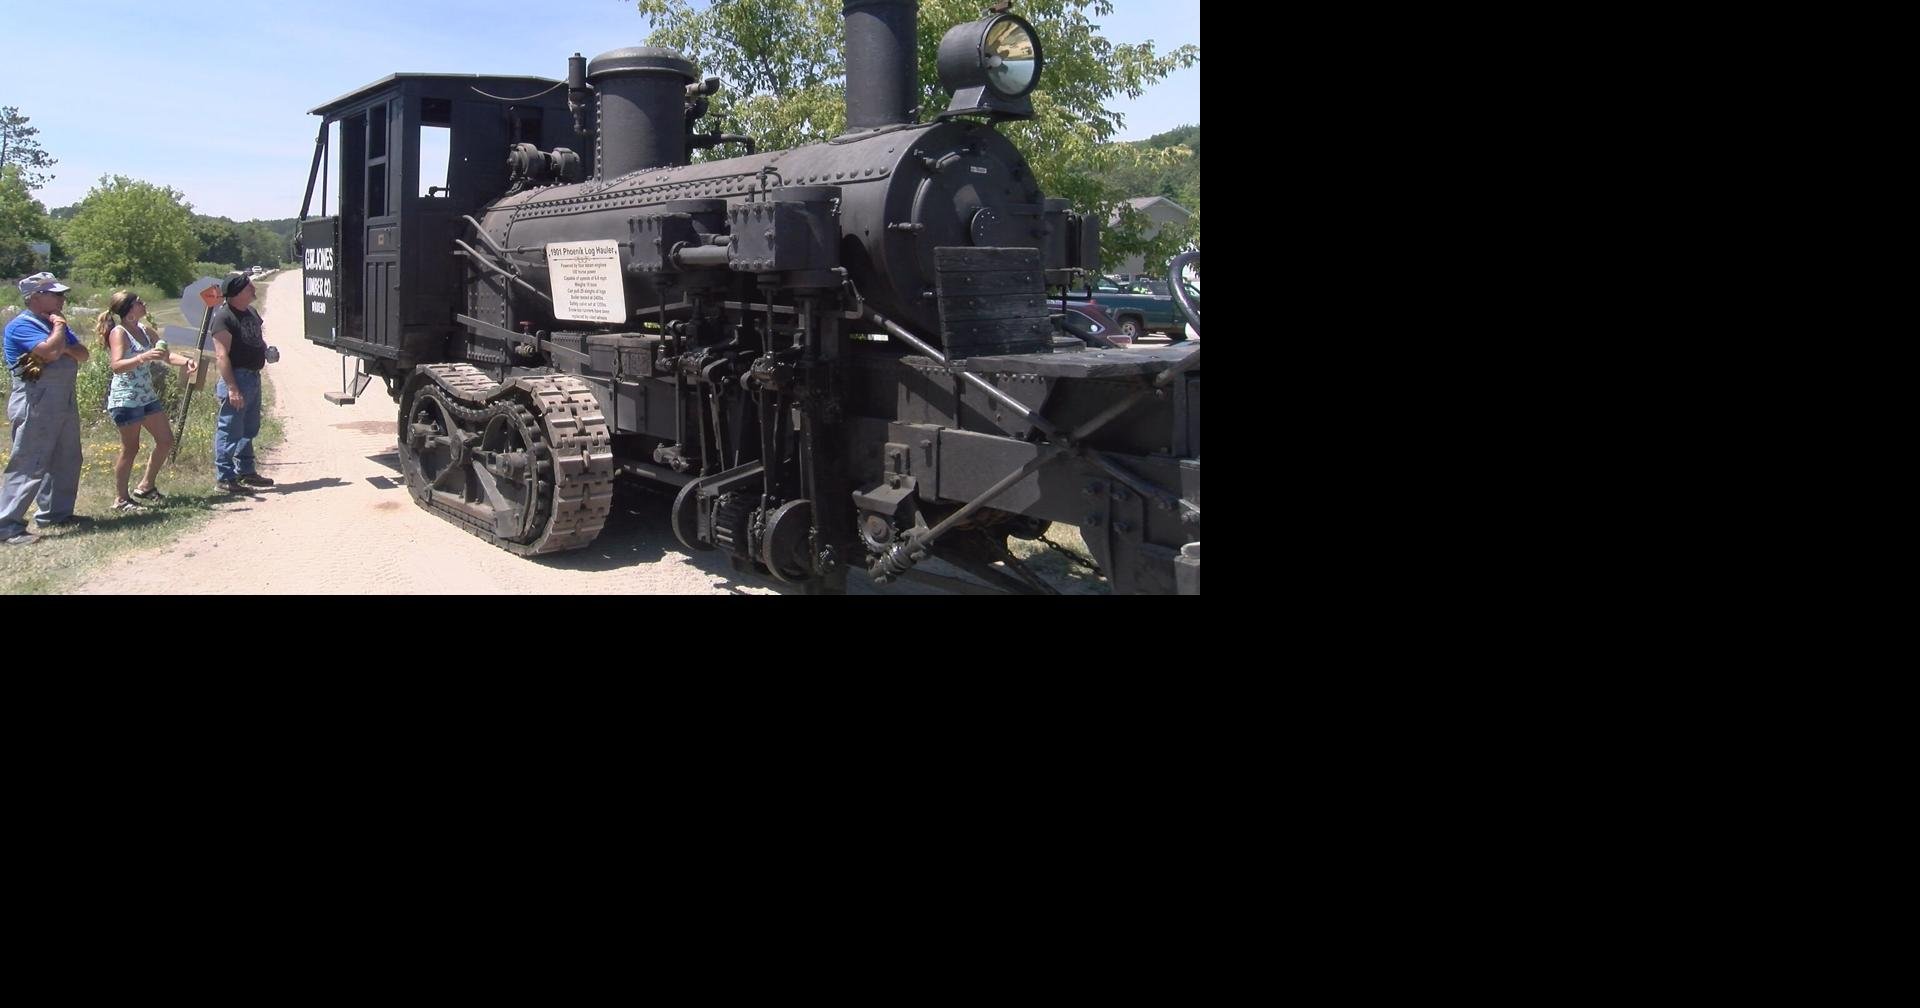 Wabeno 36th Annual SteamUp Days wraps up with parade Local News